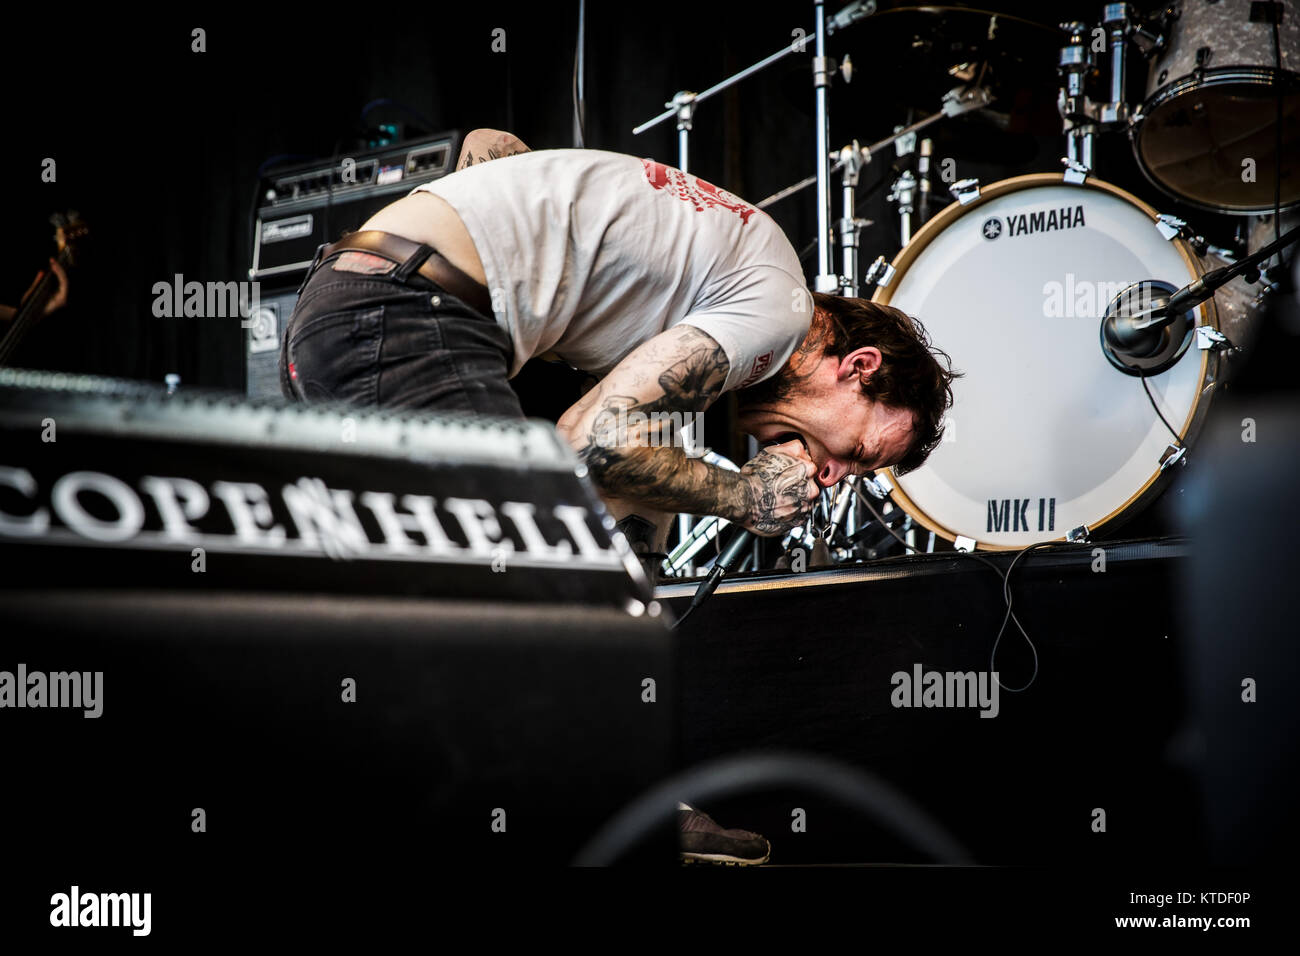 The American grindcore band Trap Them performs a live concert at the  Scandinavian heavy metal festival Copenhell 2014 in Copenhagen. Here  vocalist Ryan McKenney is seen live on stage. Denmark, 12/06 2014